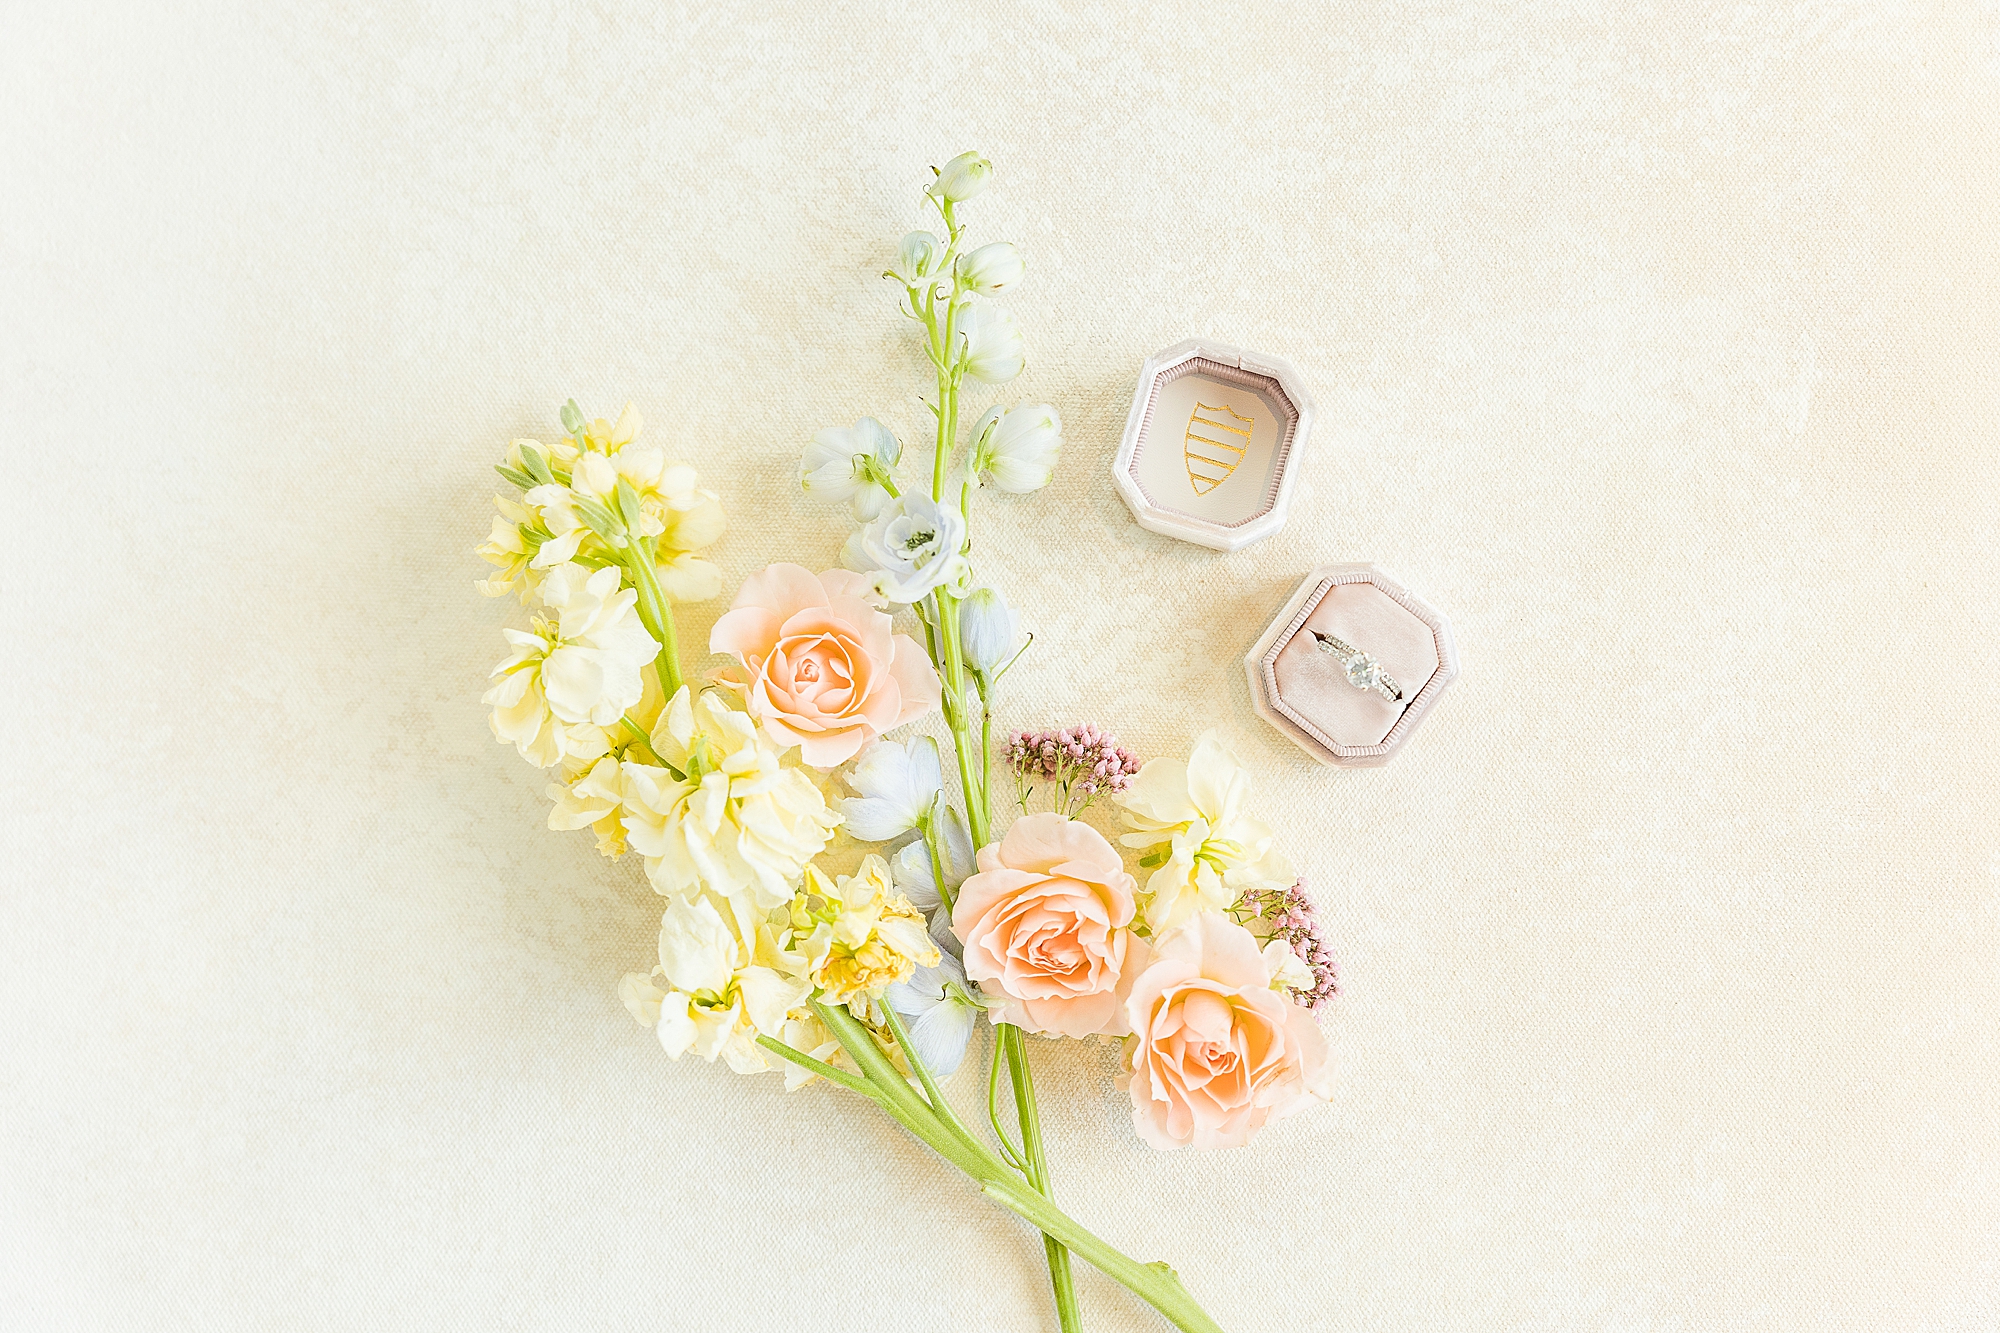 A whimsical photograph of the pastel wedding blooms and the bride's ring